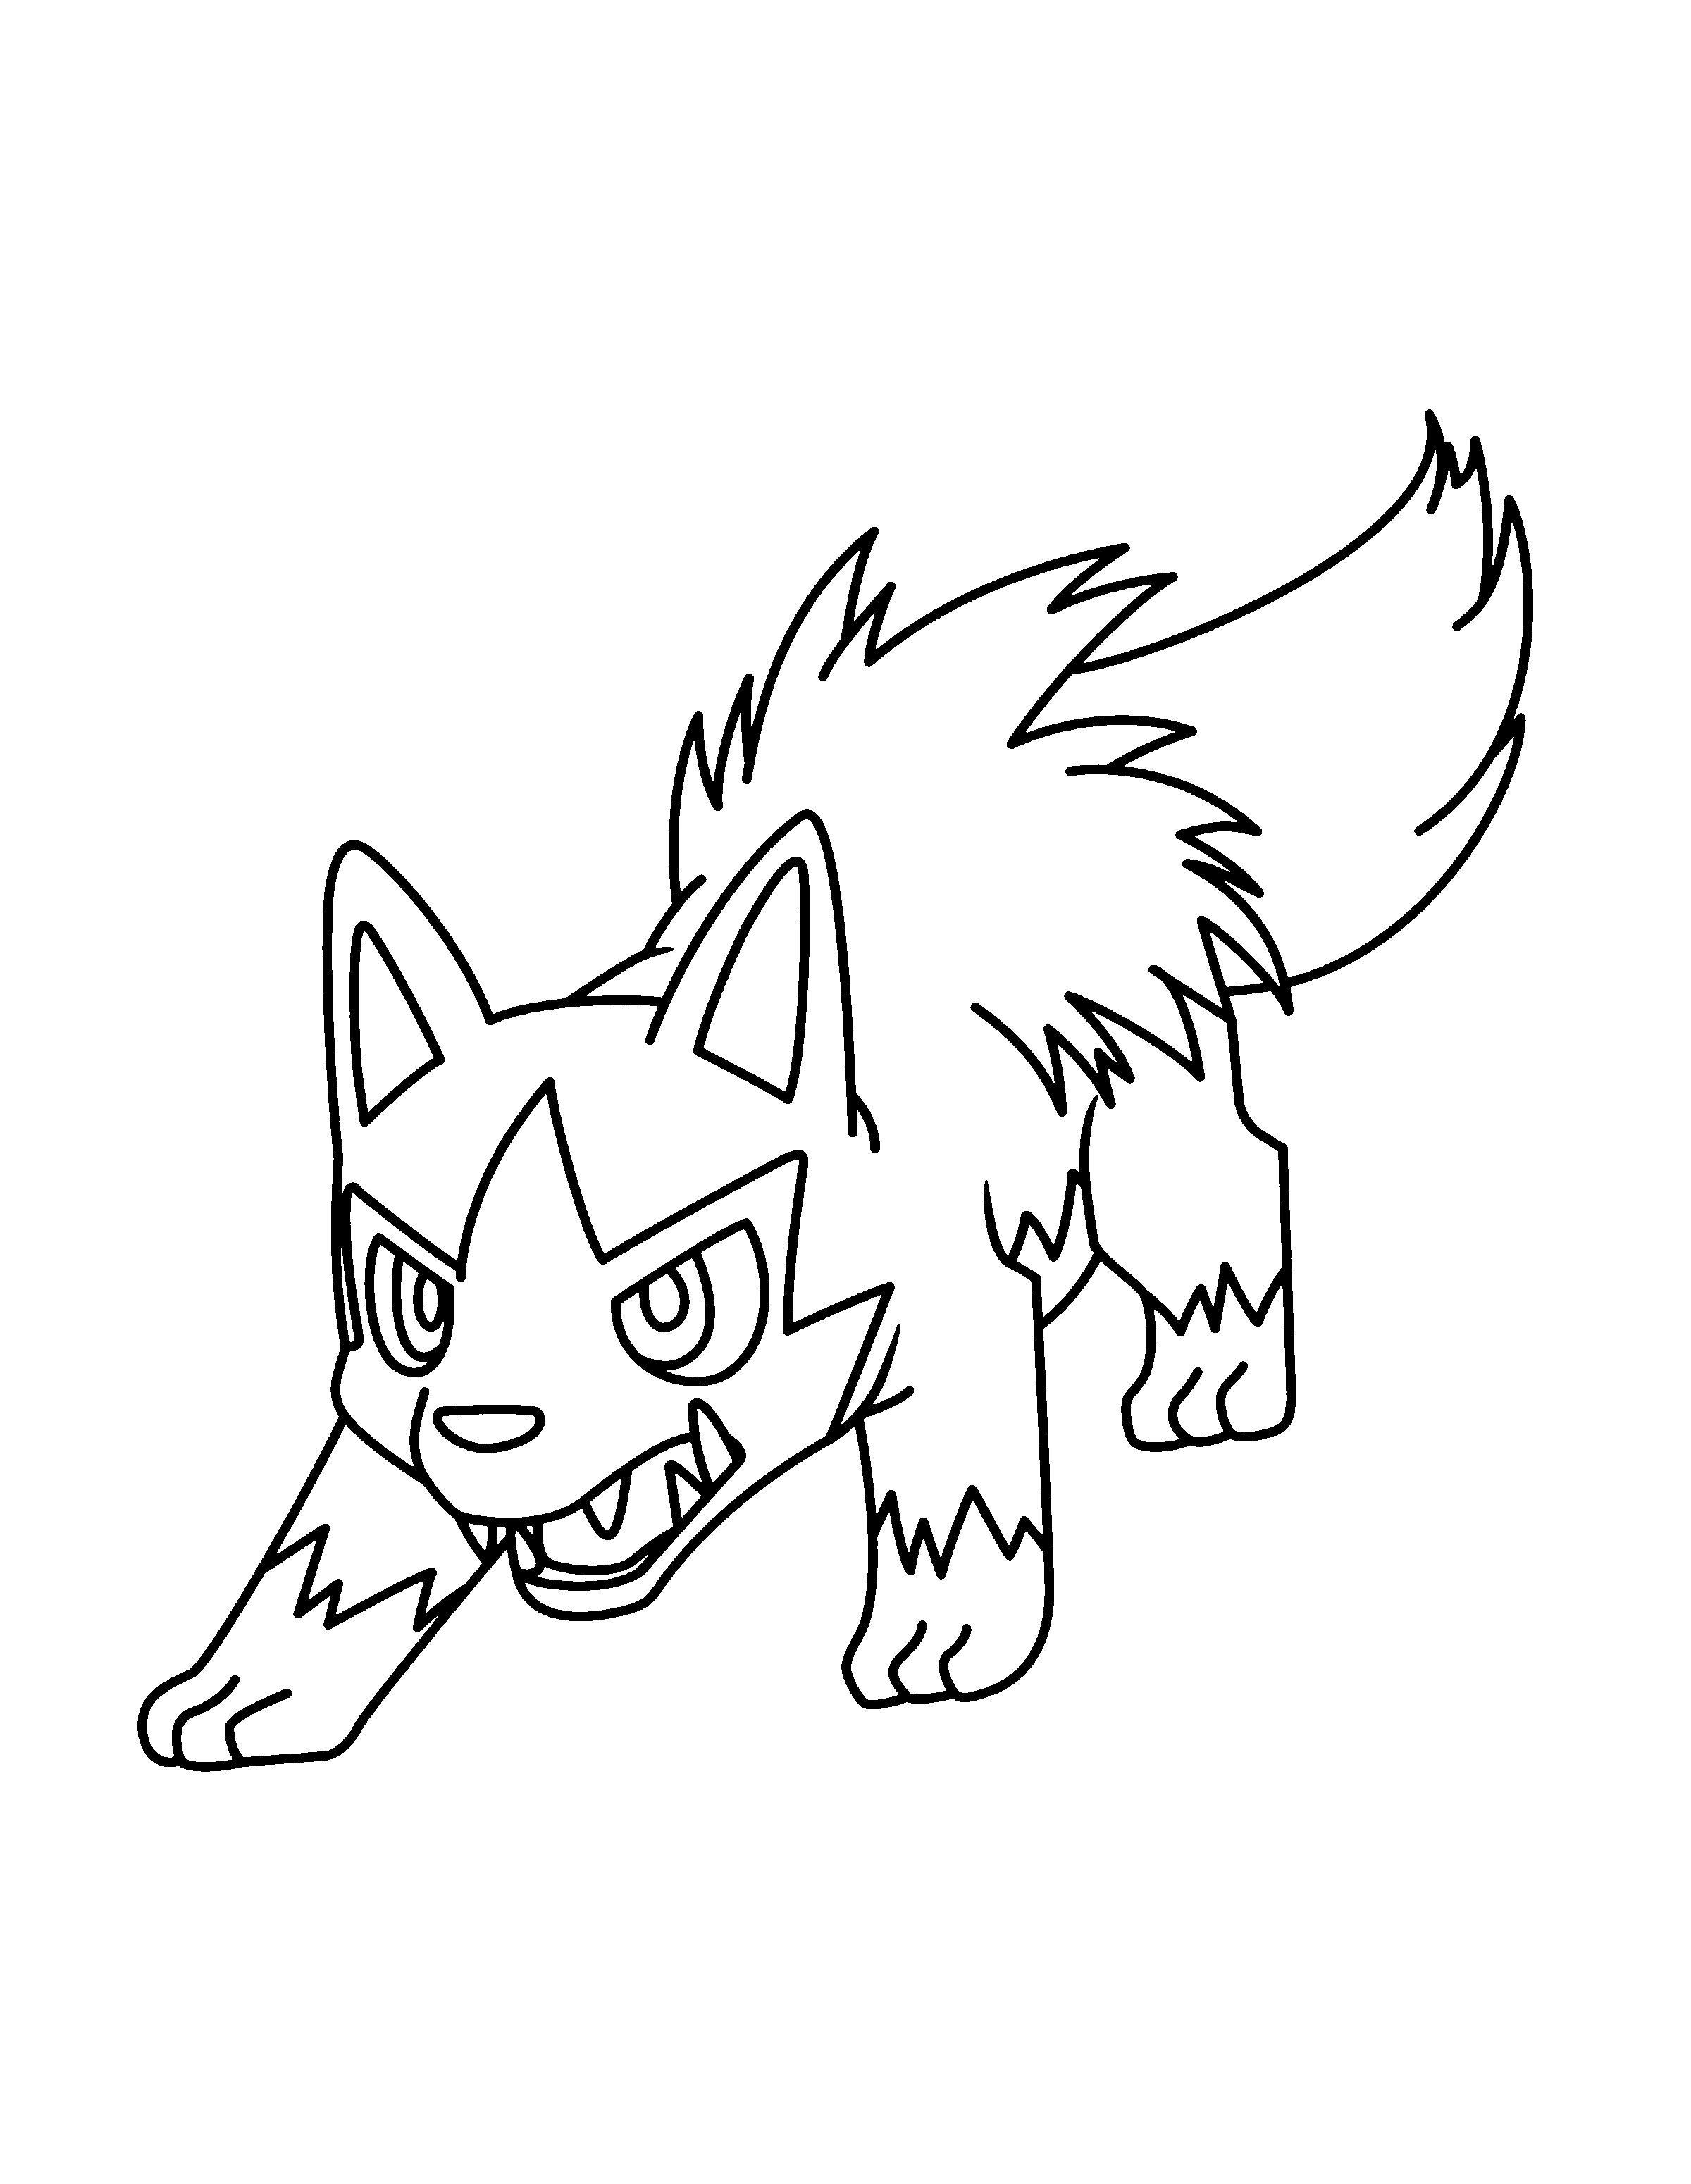 Poochyena Coloring Pages Free Poochyena Coloring Pages Download Free Clip Art Free Clip Art